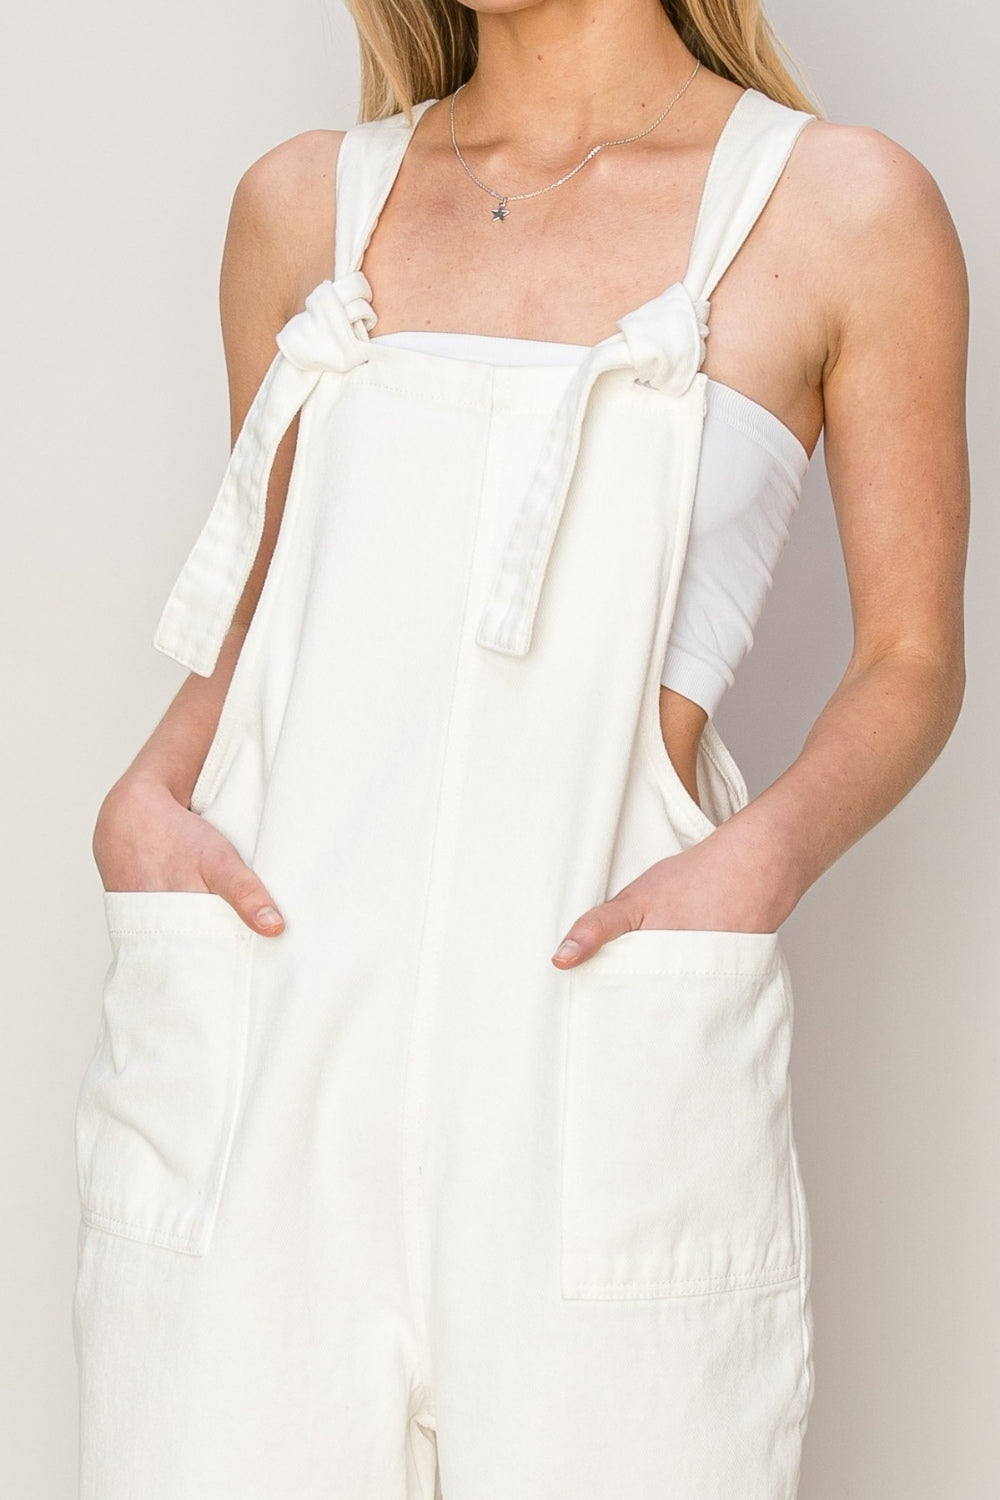 HYFVE Washed Twill Knotted Strap Overalls